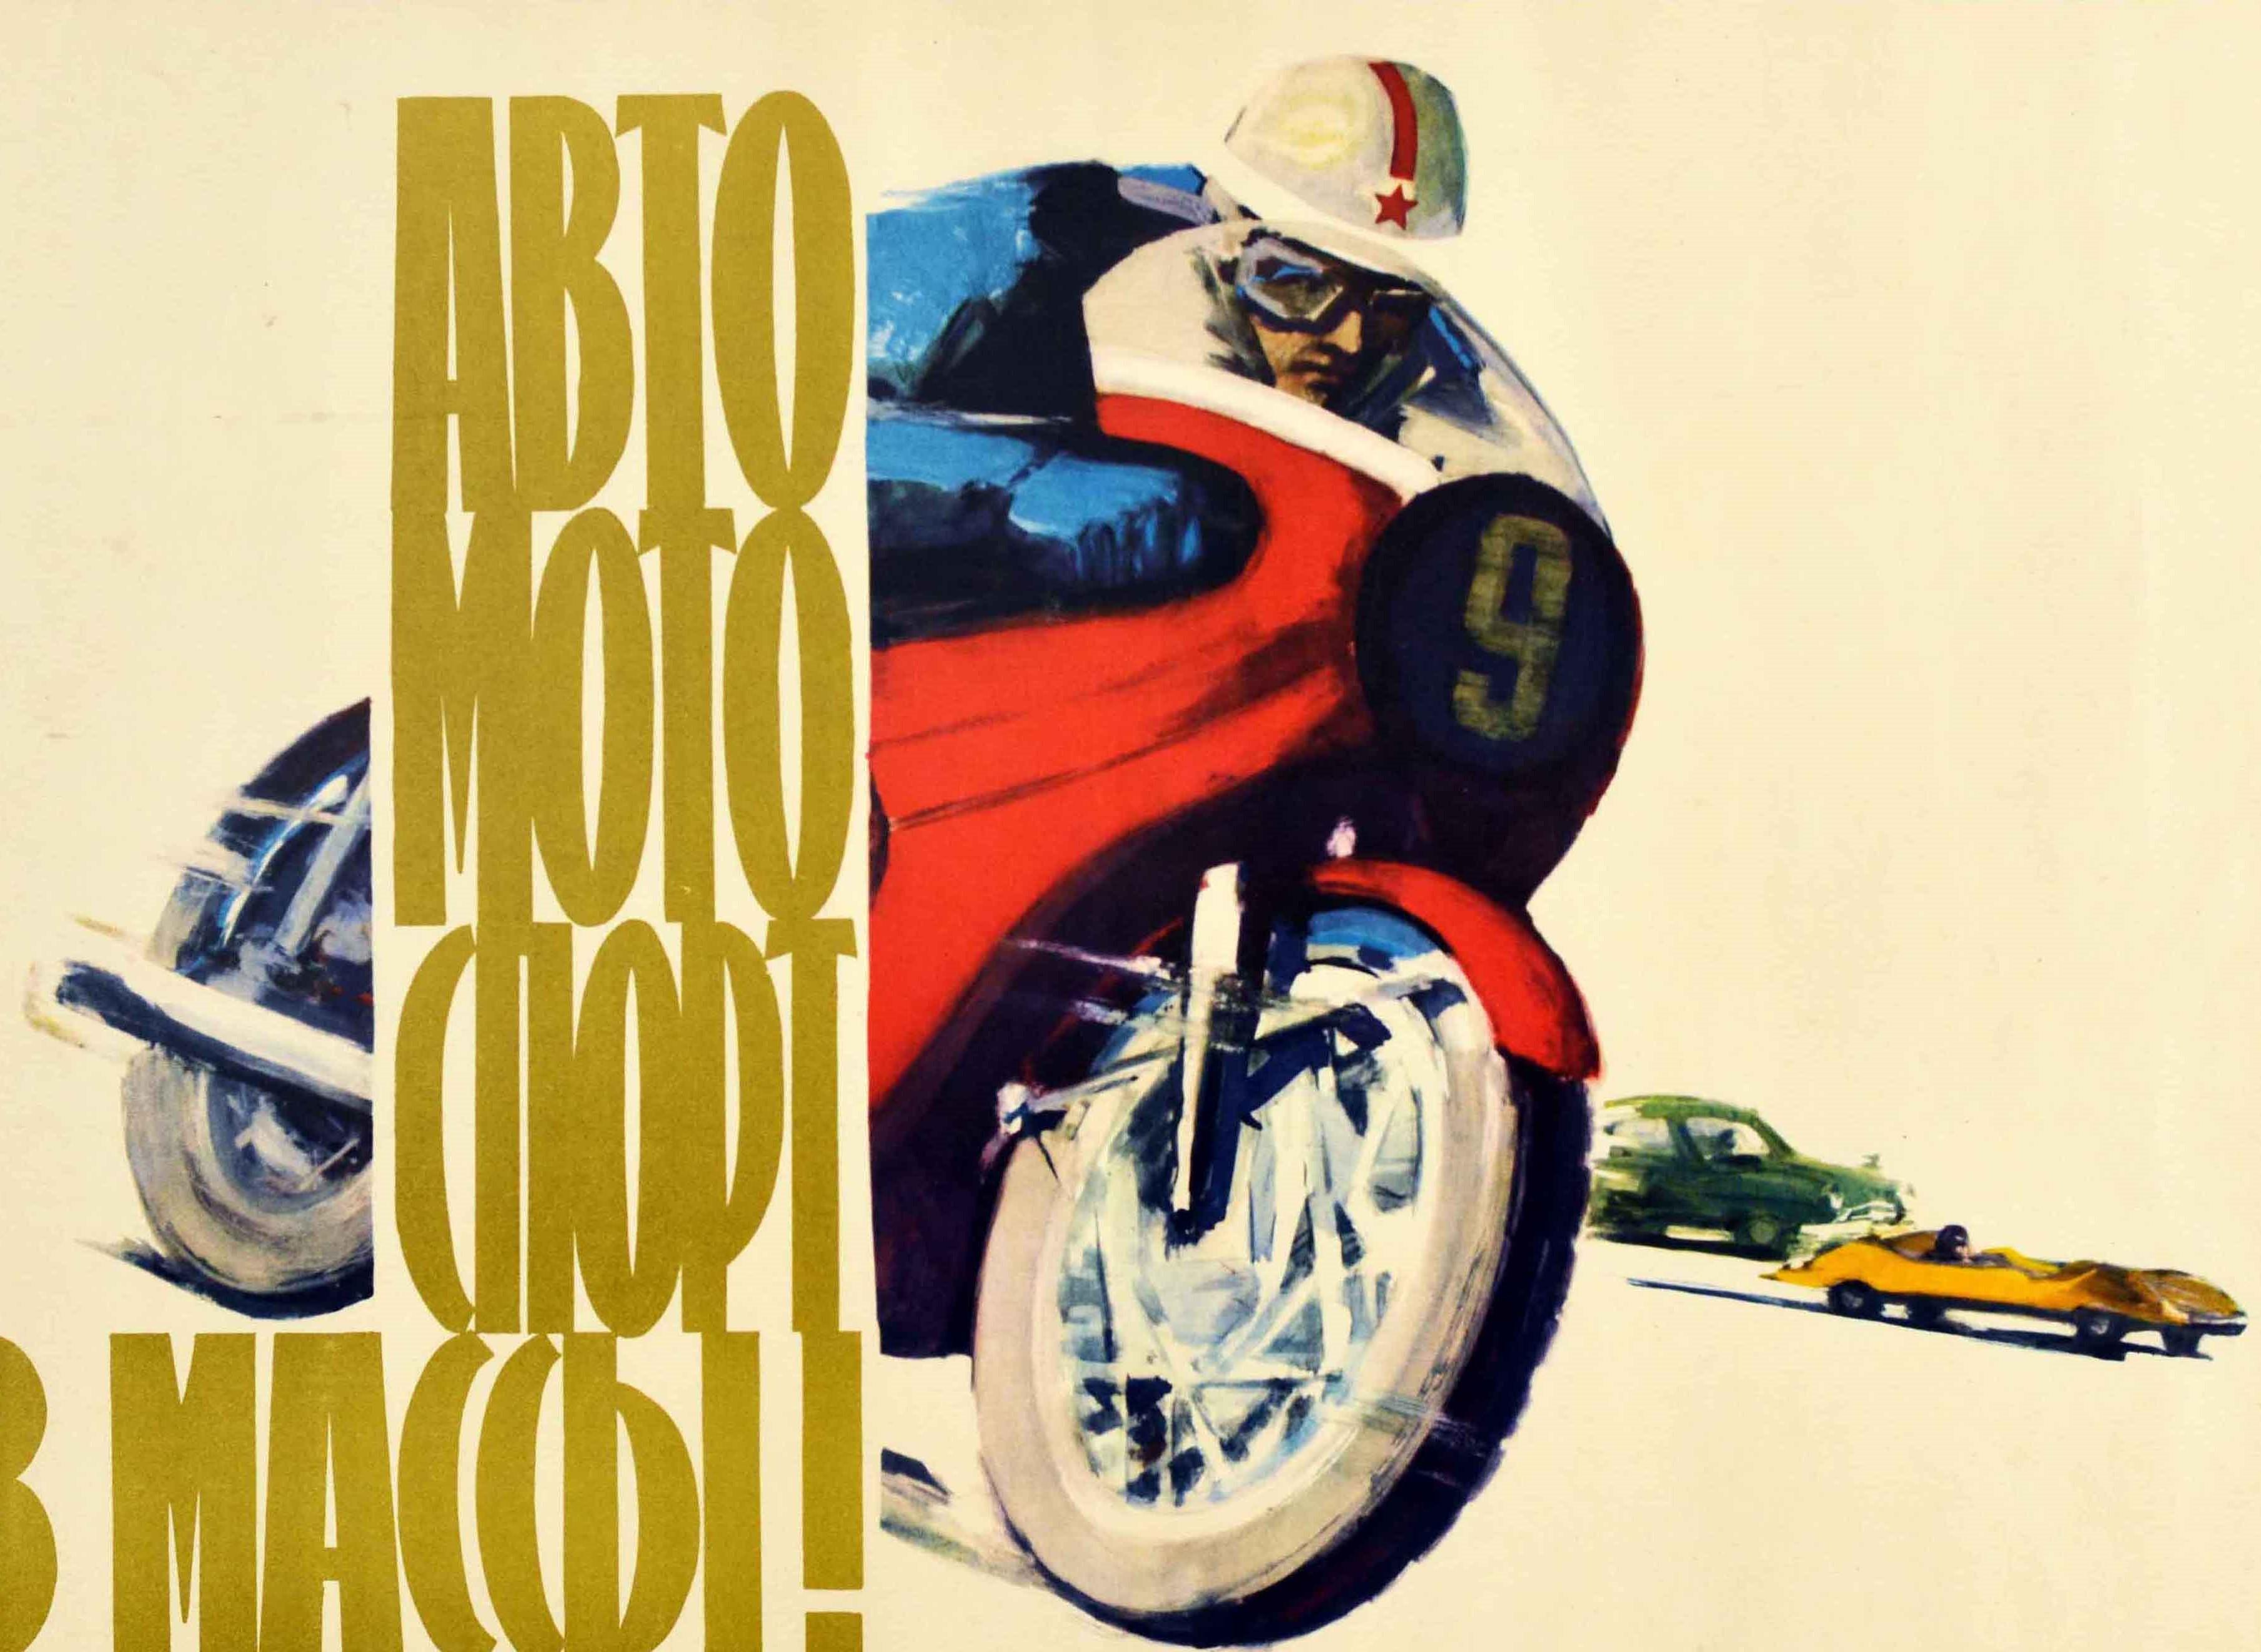 Original vintage Soviet sports poster - Auto moto sports to the masses! / Авто мото спорт в массы! - featuring a dynamic illustration of a motorcyclist speeding along on a red motorcycle with yellow and green racing cars in the background, the